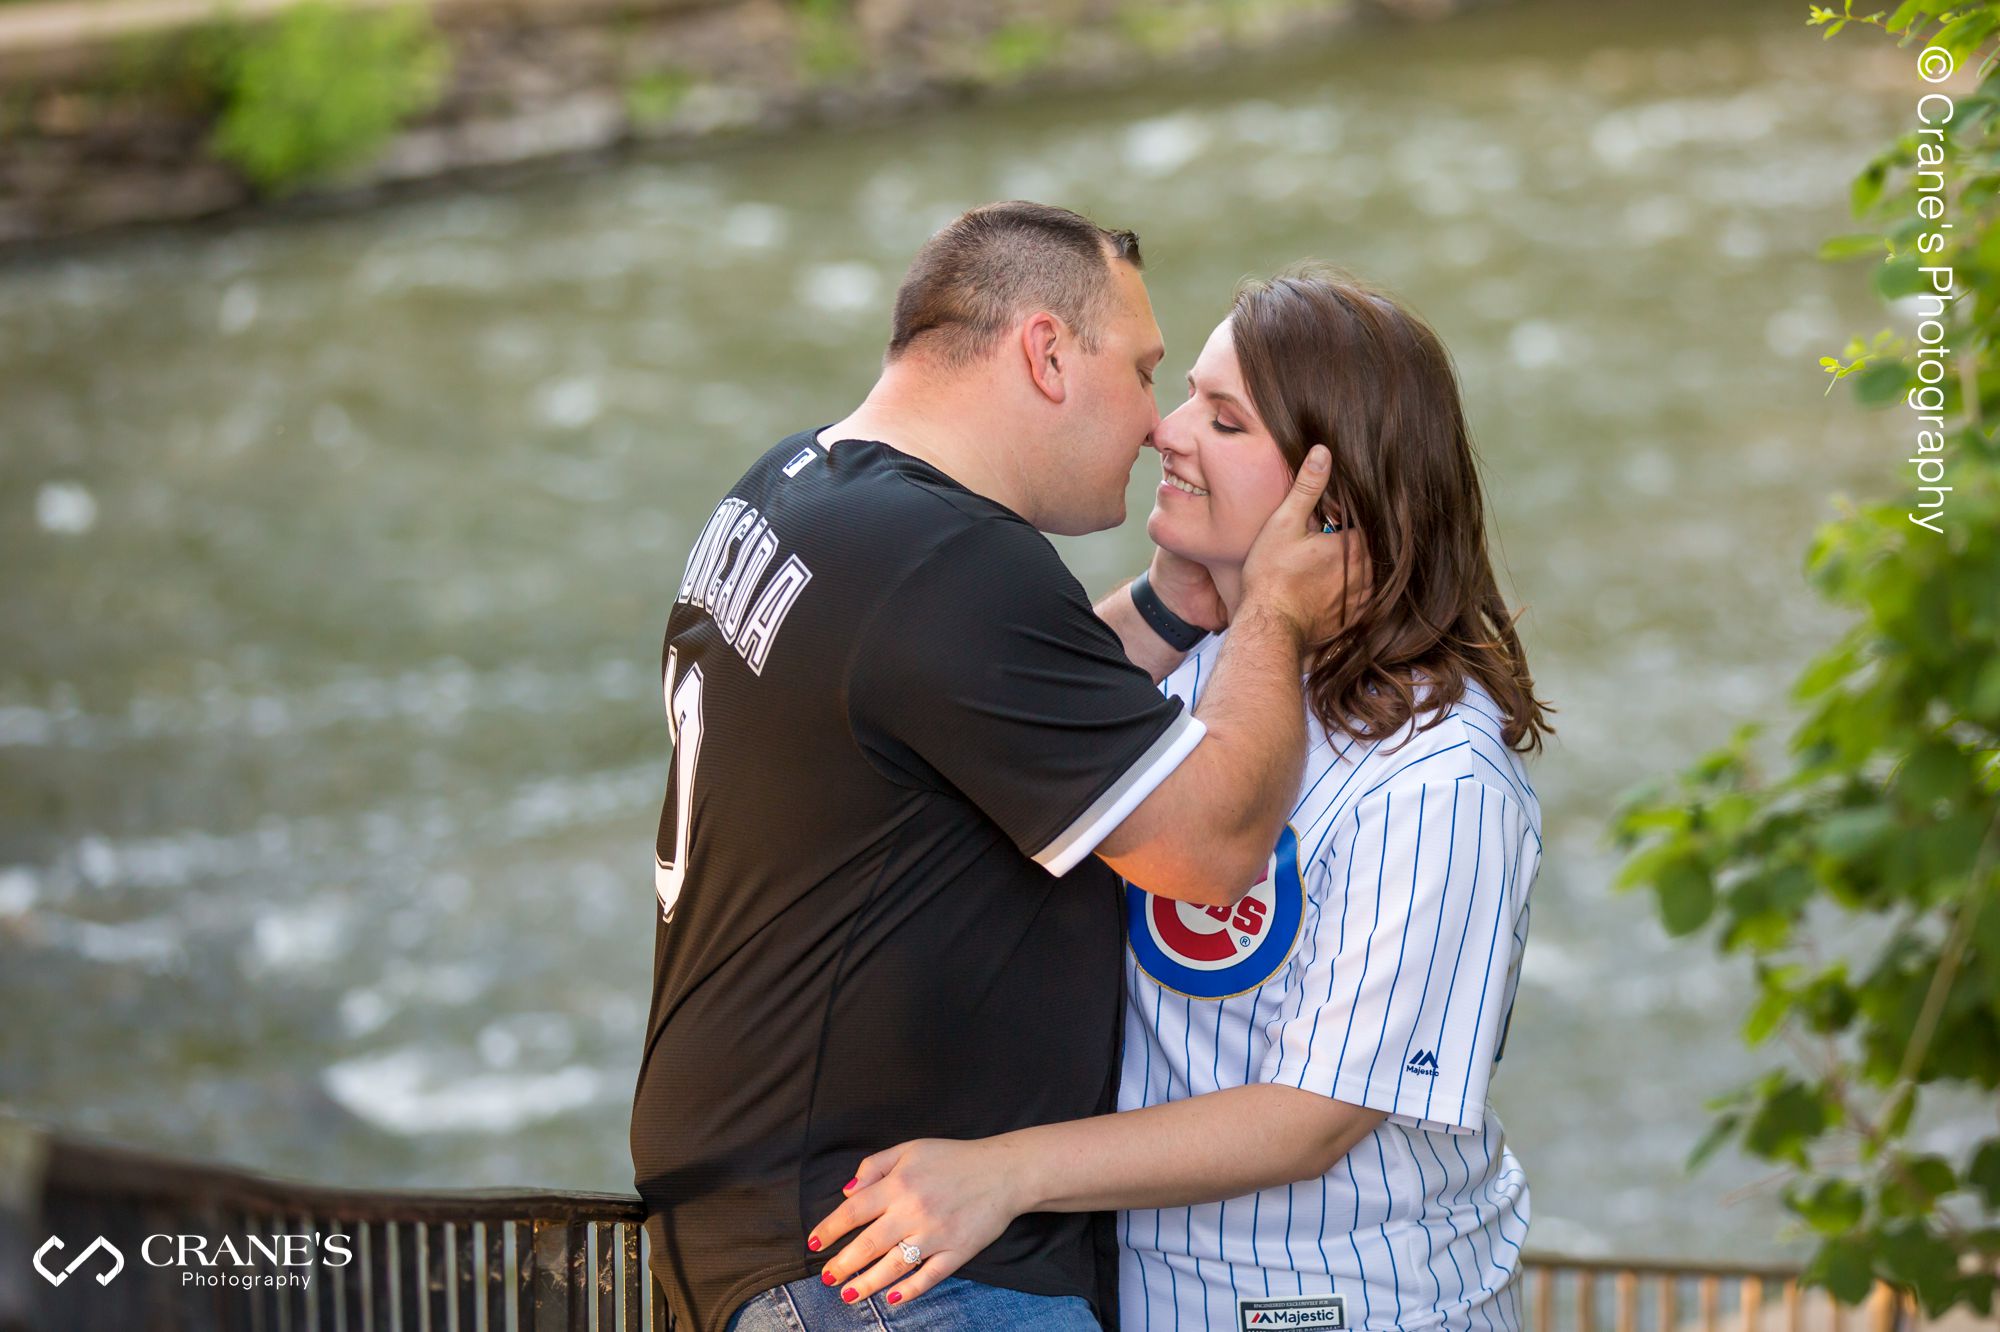 A couple wearing baseball jerseys kissing with a river in the background